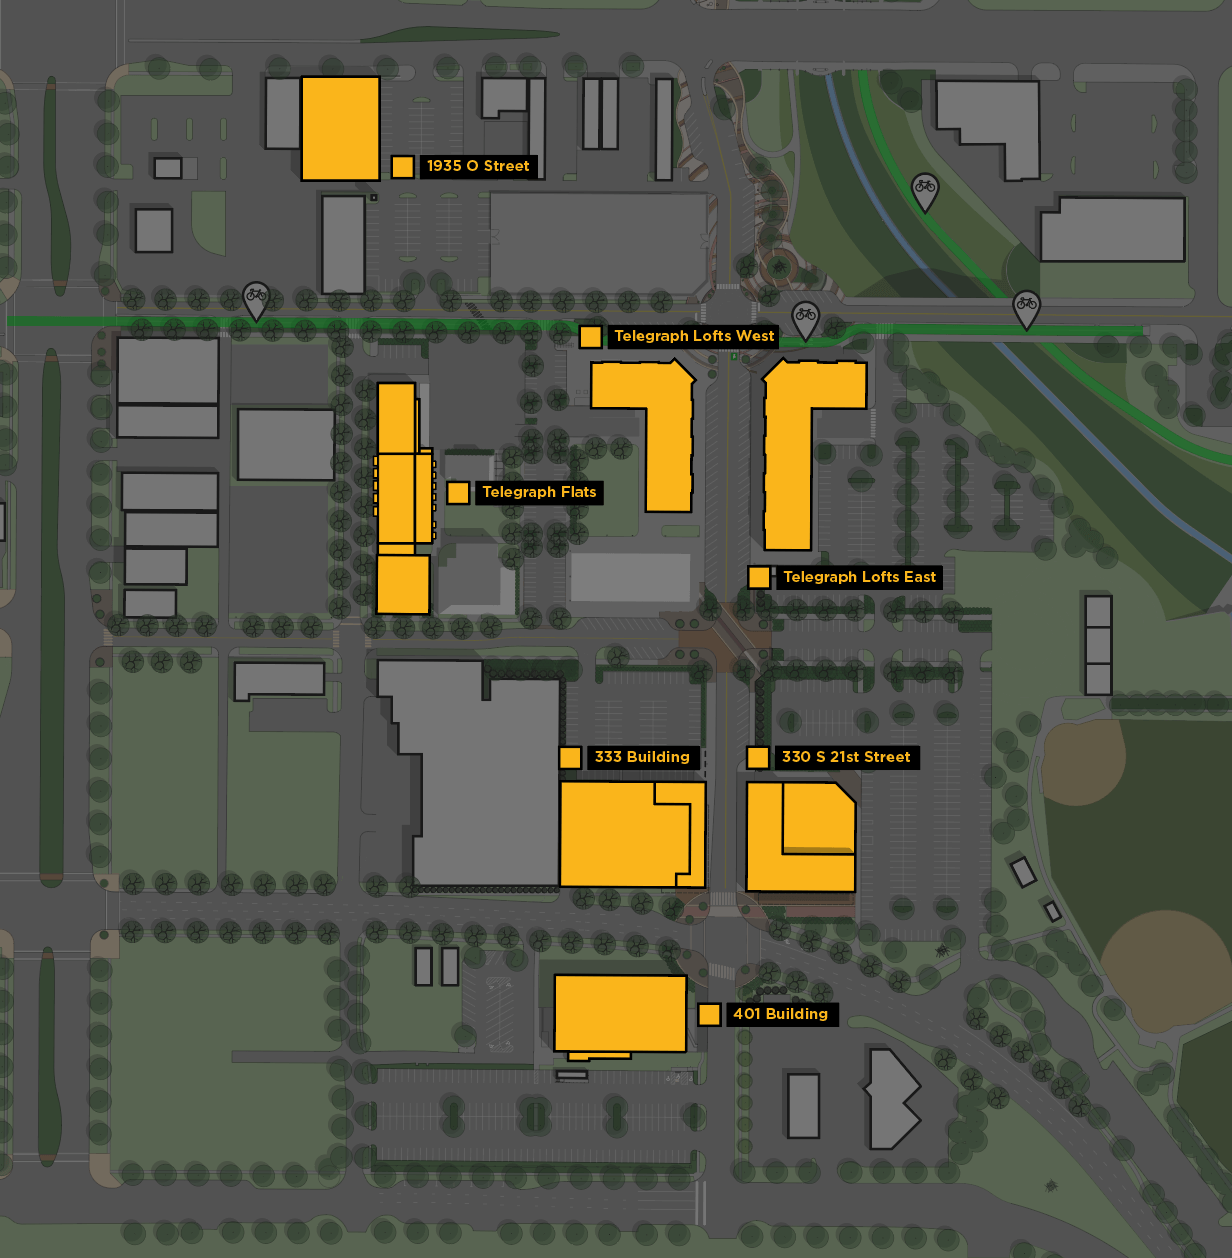 District Map for Up and Running - Includes: Telegraph Flats, Telegraph Lofts West, Telegraph Lofts East, 333 Building, 330 S 21st St, and 401 Building